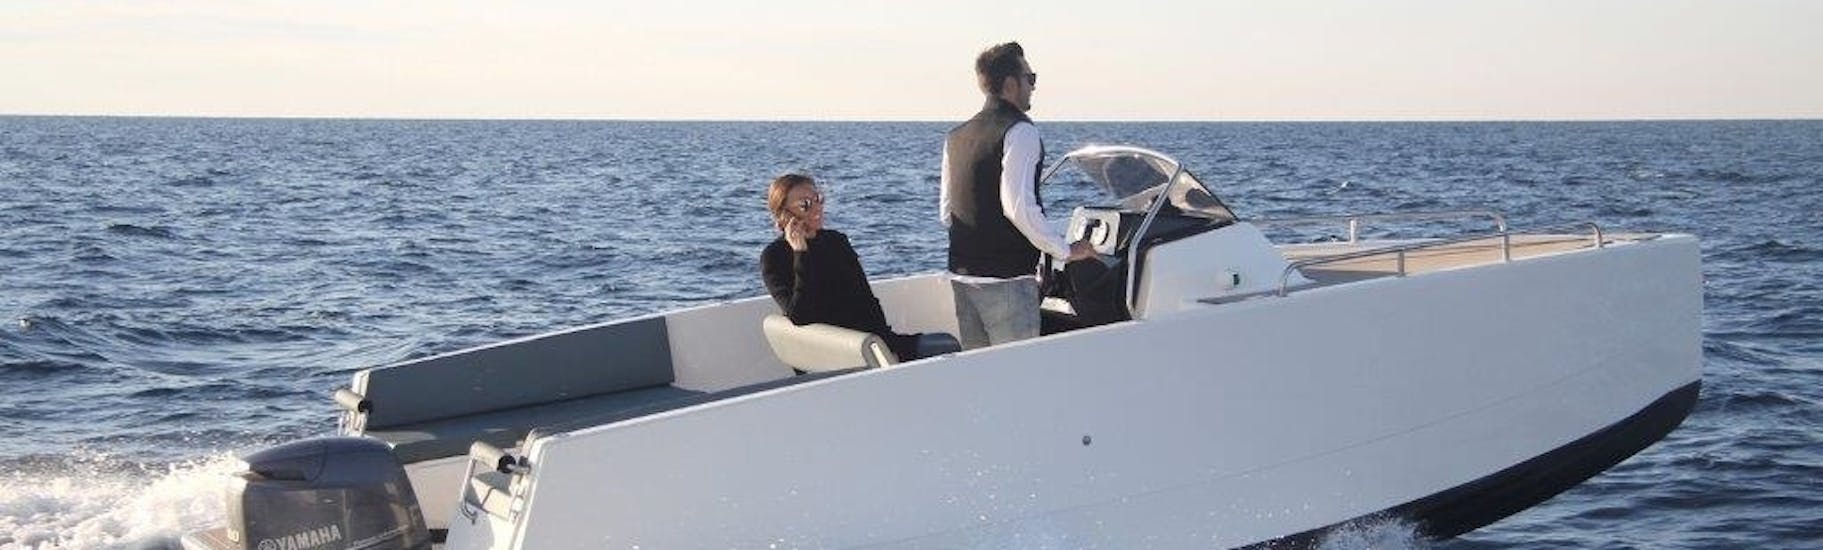 A couple navigating during a Boat Rental in Marbella (up to 7 people) with Royal Catamaran.